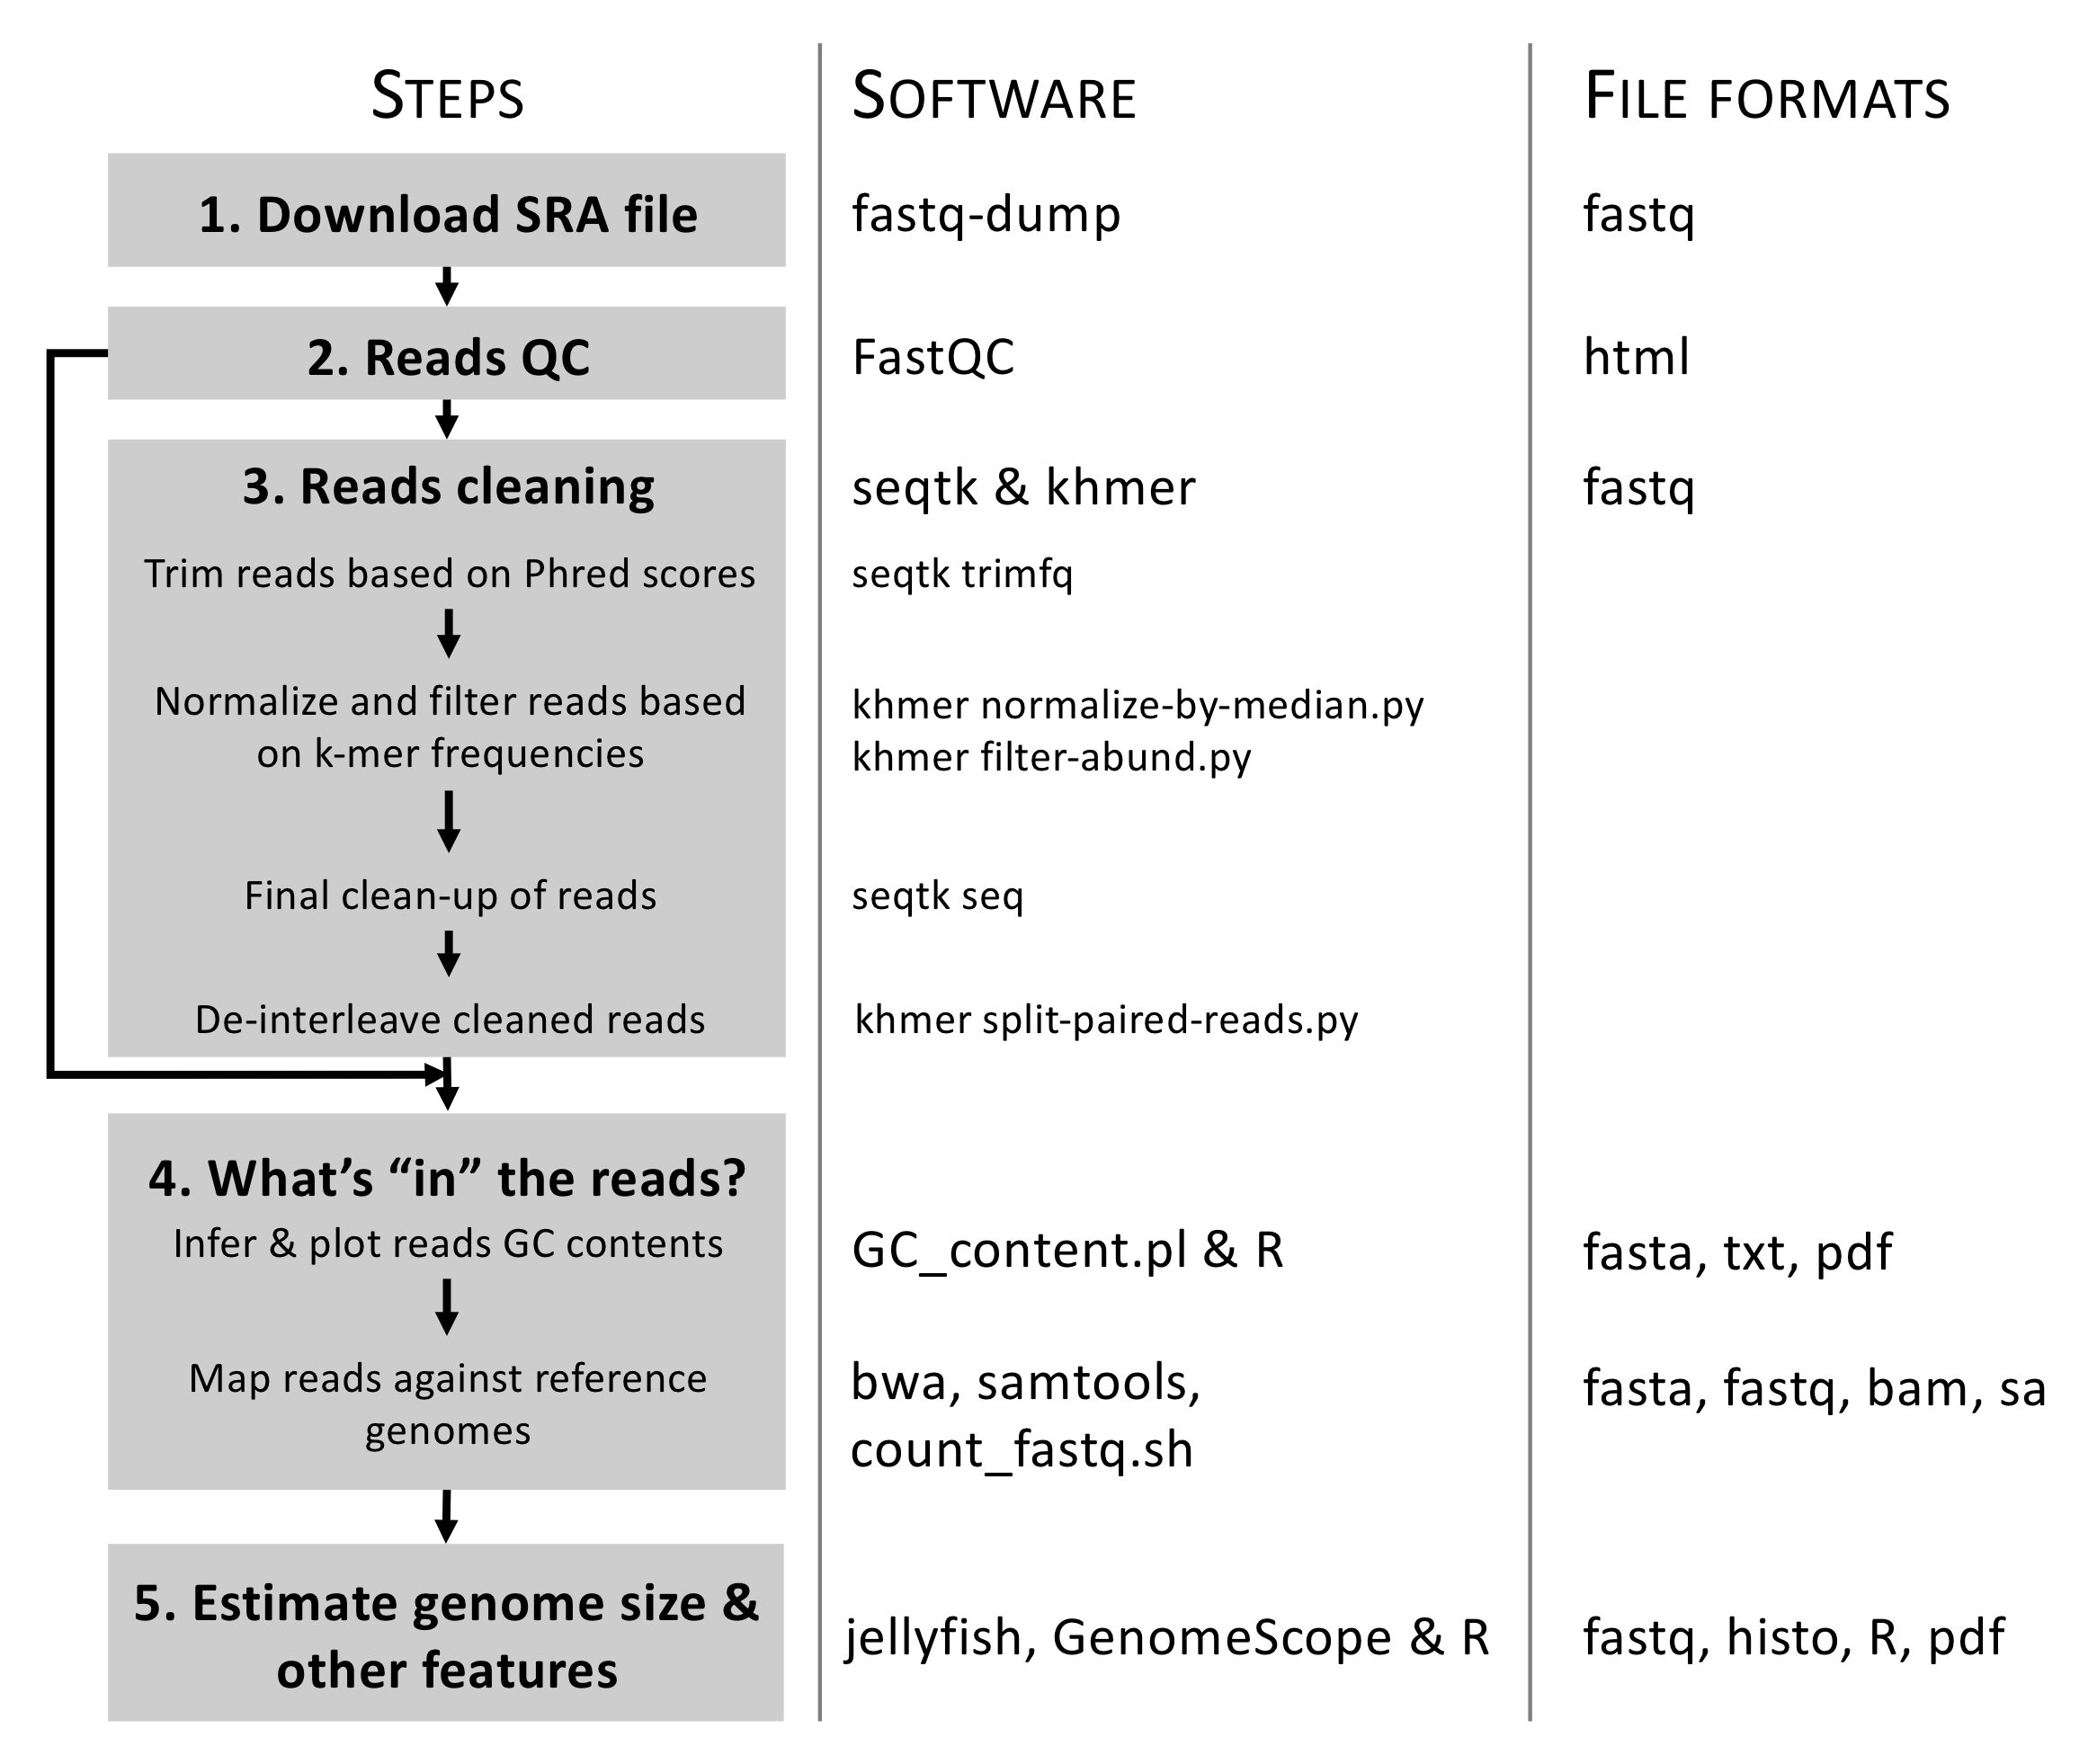 Overview of the analytical workflow applied here to prepare/clean Illumina reads for genome assembly and inferring genome size and complexity. Details on associated bioinformatic tools (here software) and file formats are also provided.